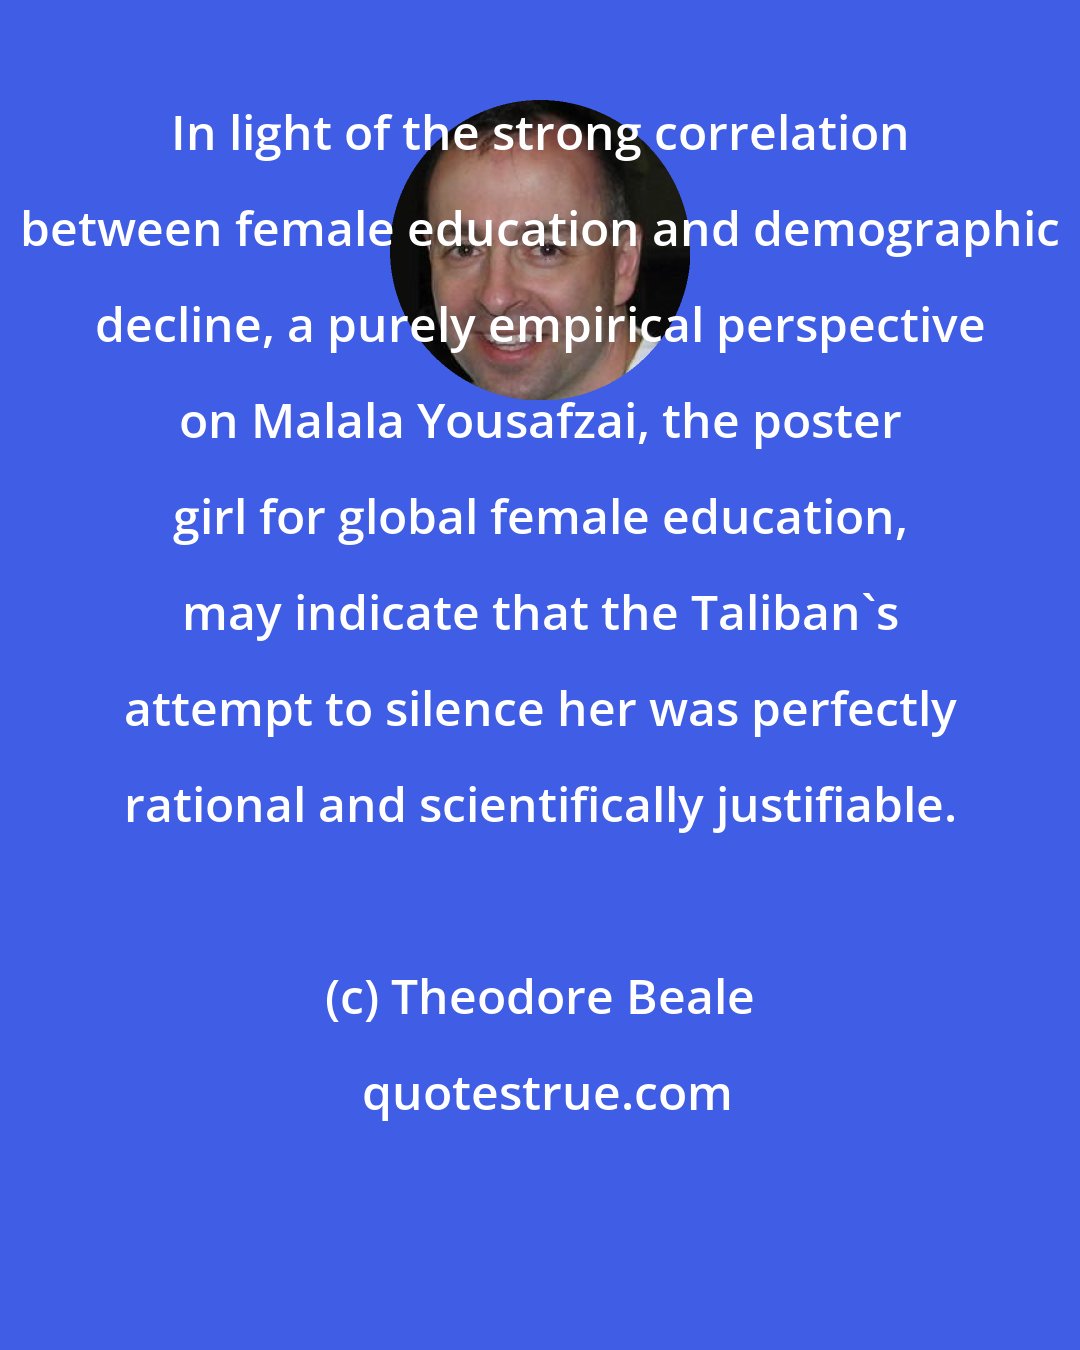 Theodore Beale: In light of the strong correlation between female education and demographic decline, a purely empirical perspective on Malala Yousafzai, the poster girl for global female education, may indicate that the Taliban's attempt to silence her was perfectly rational and scientifically justifiable.